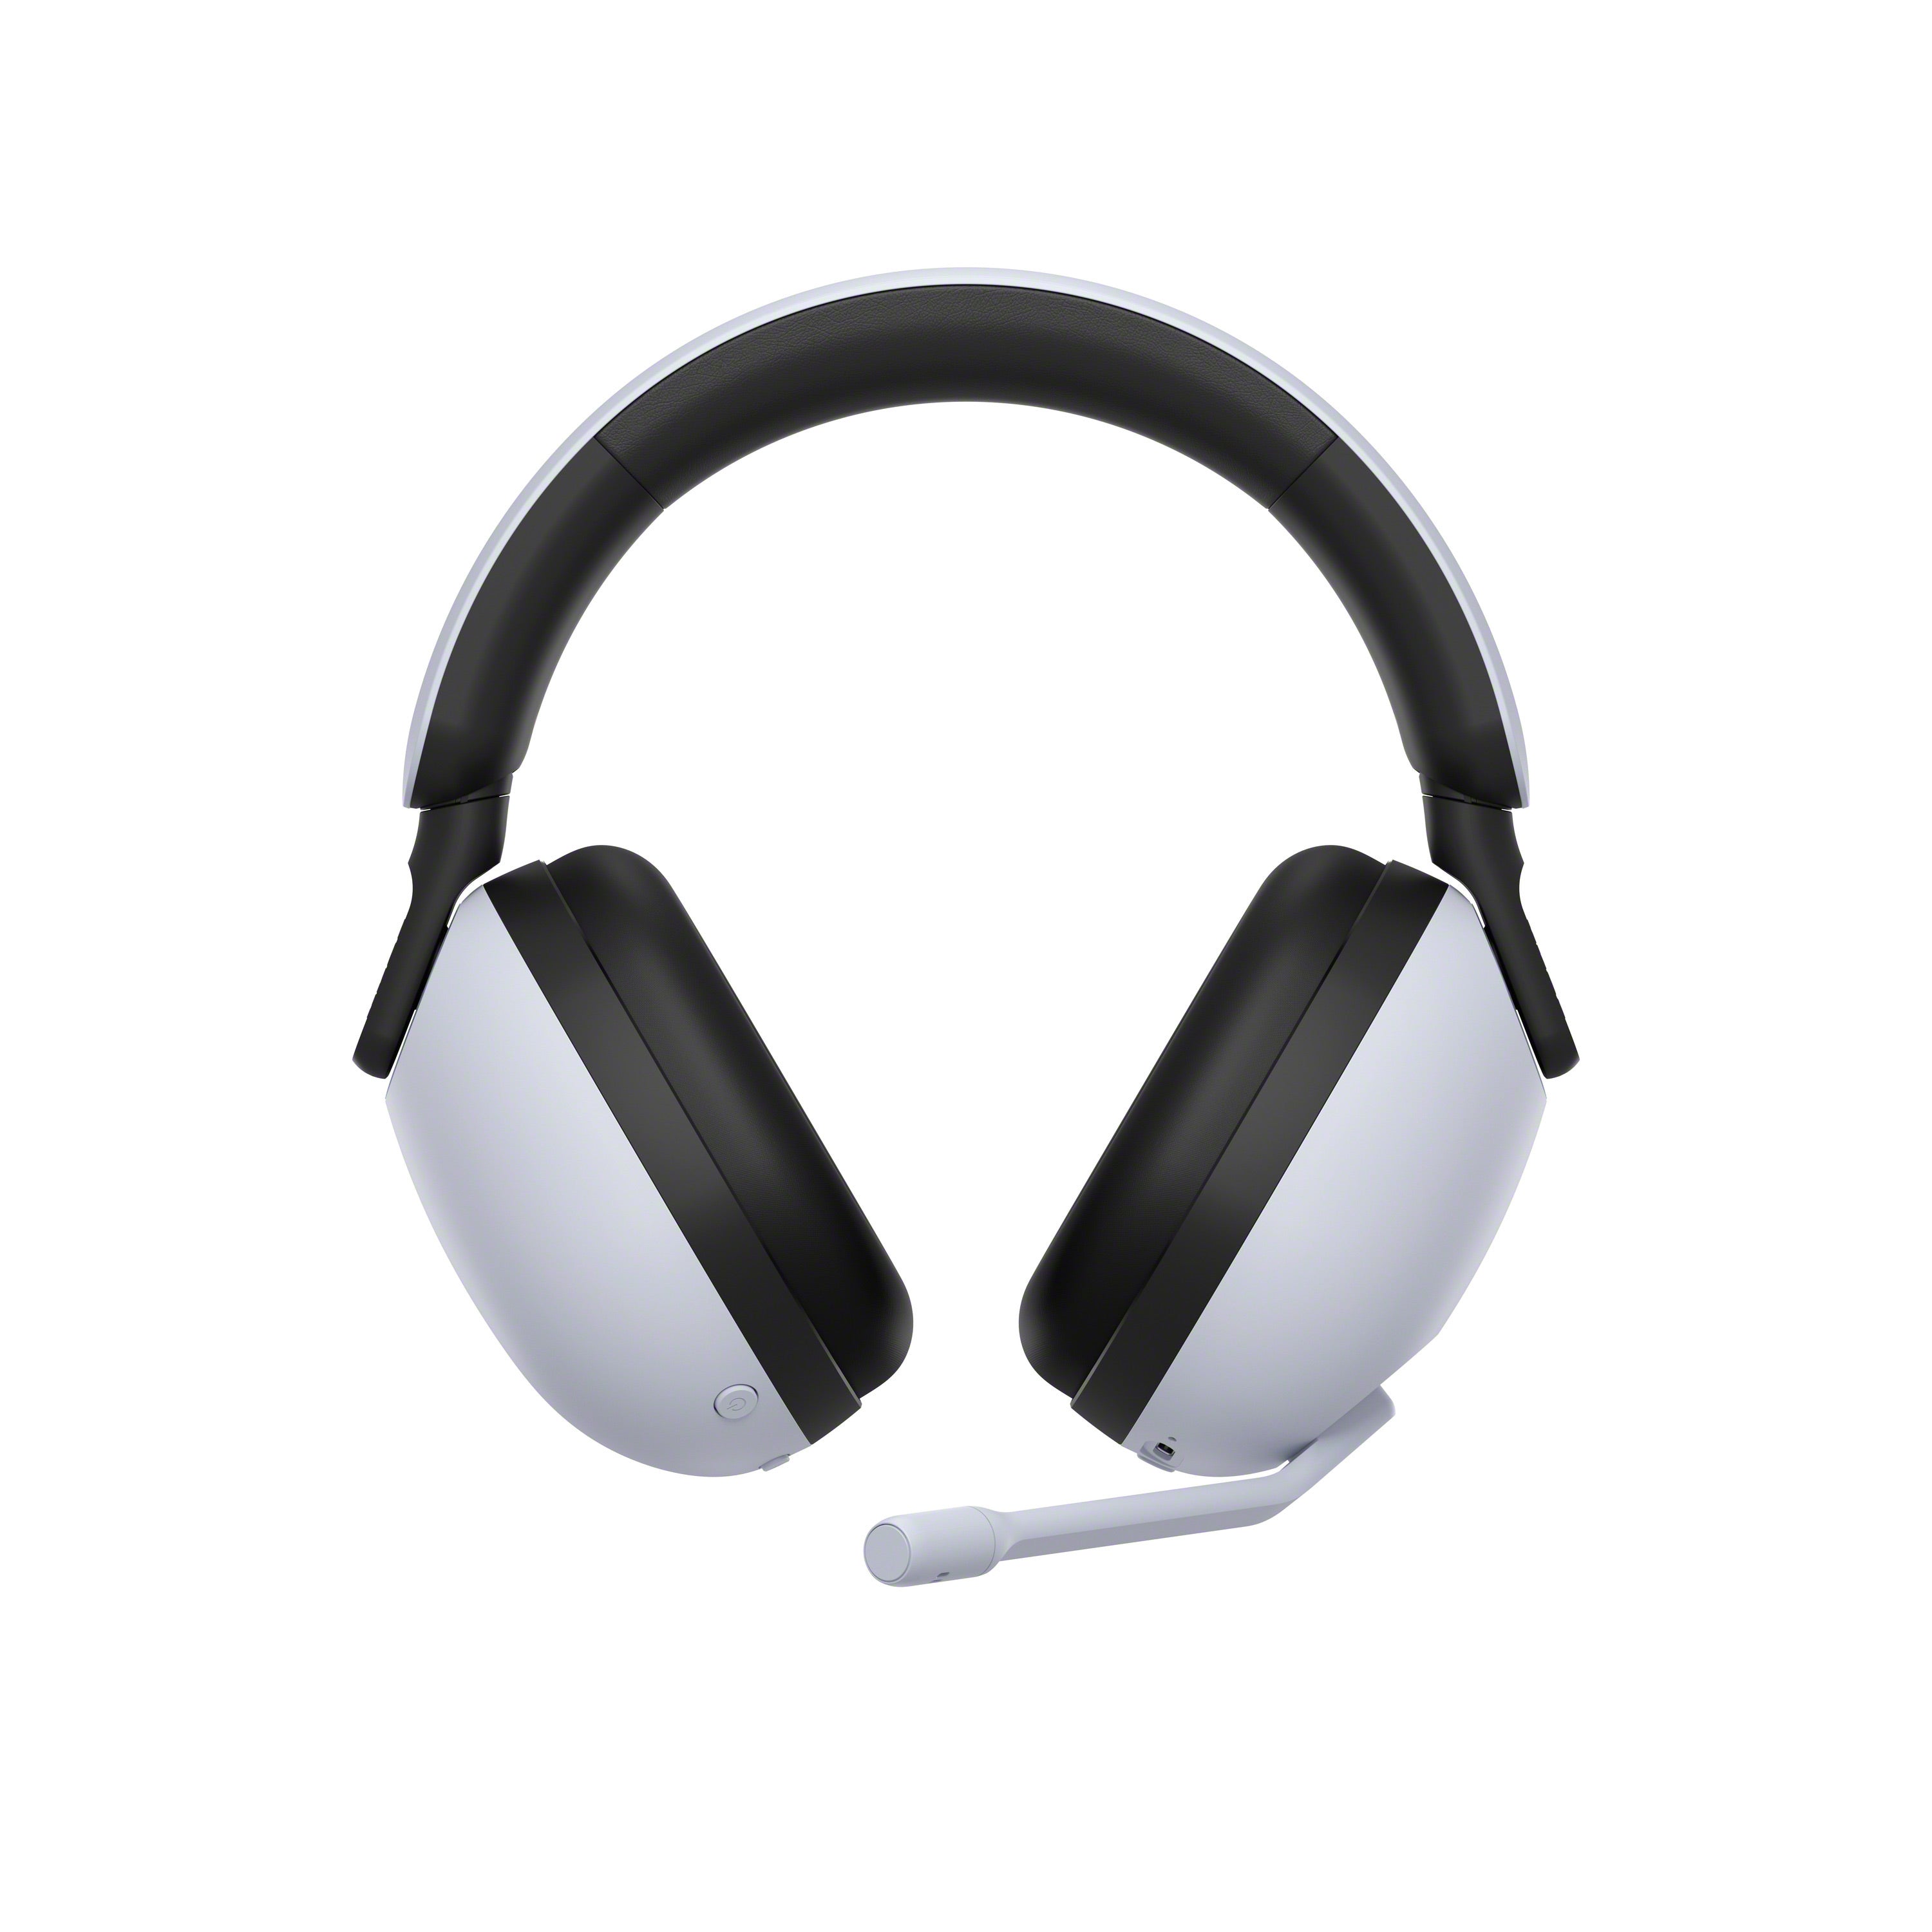 INZONE H9 Wireless Noise Canceling Gaming Headset | WH-G900N